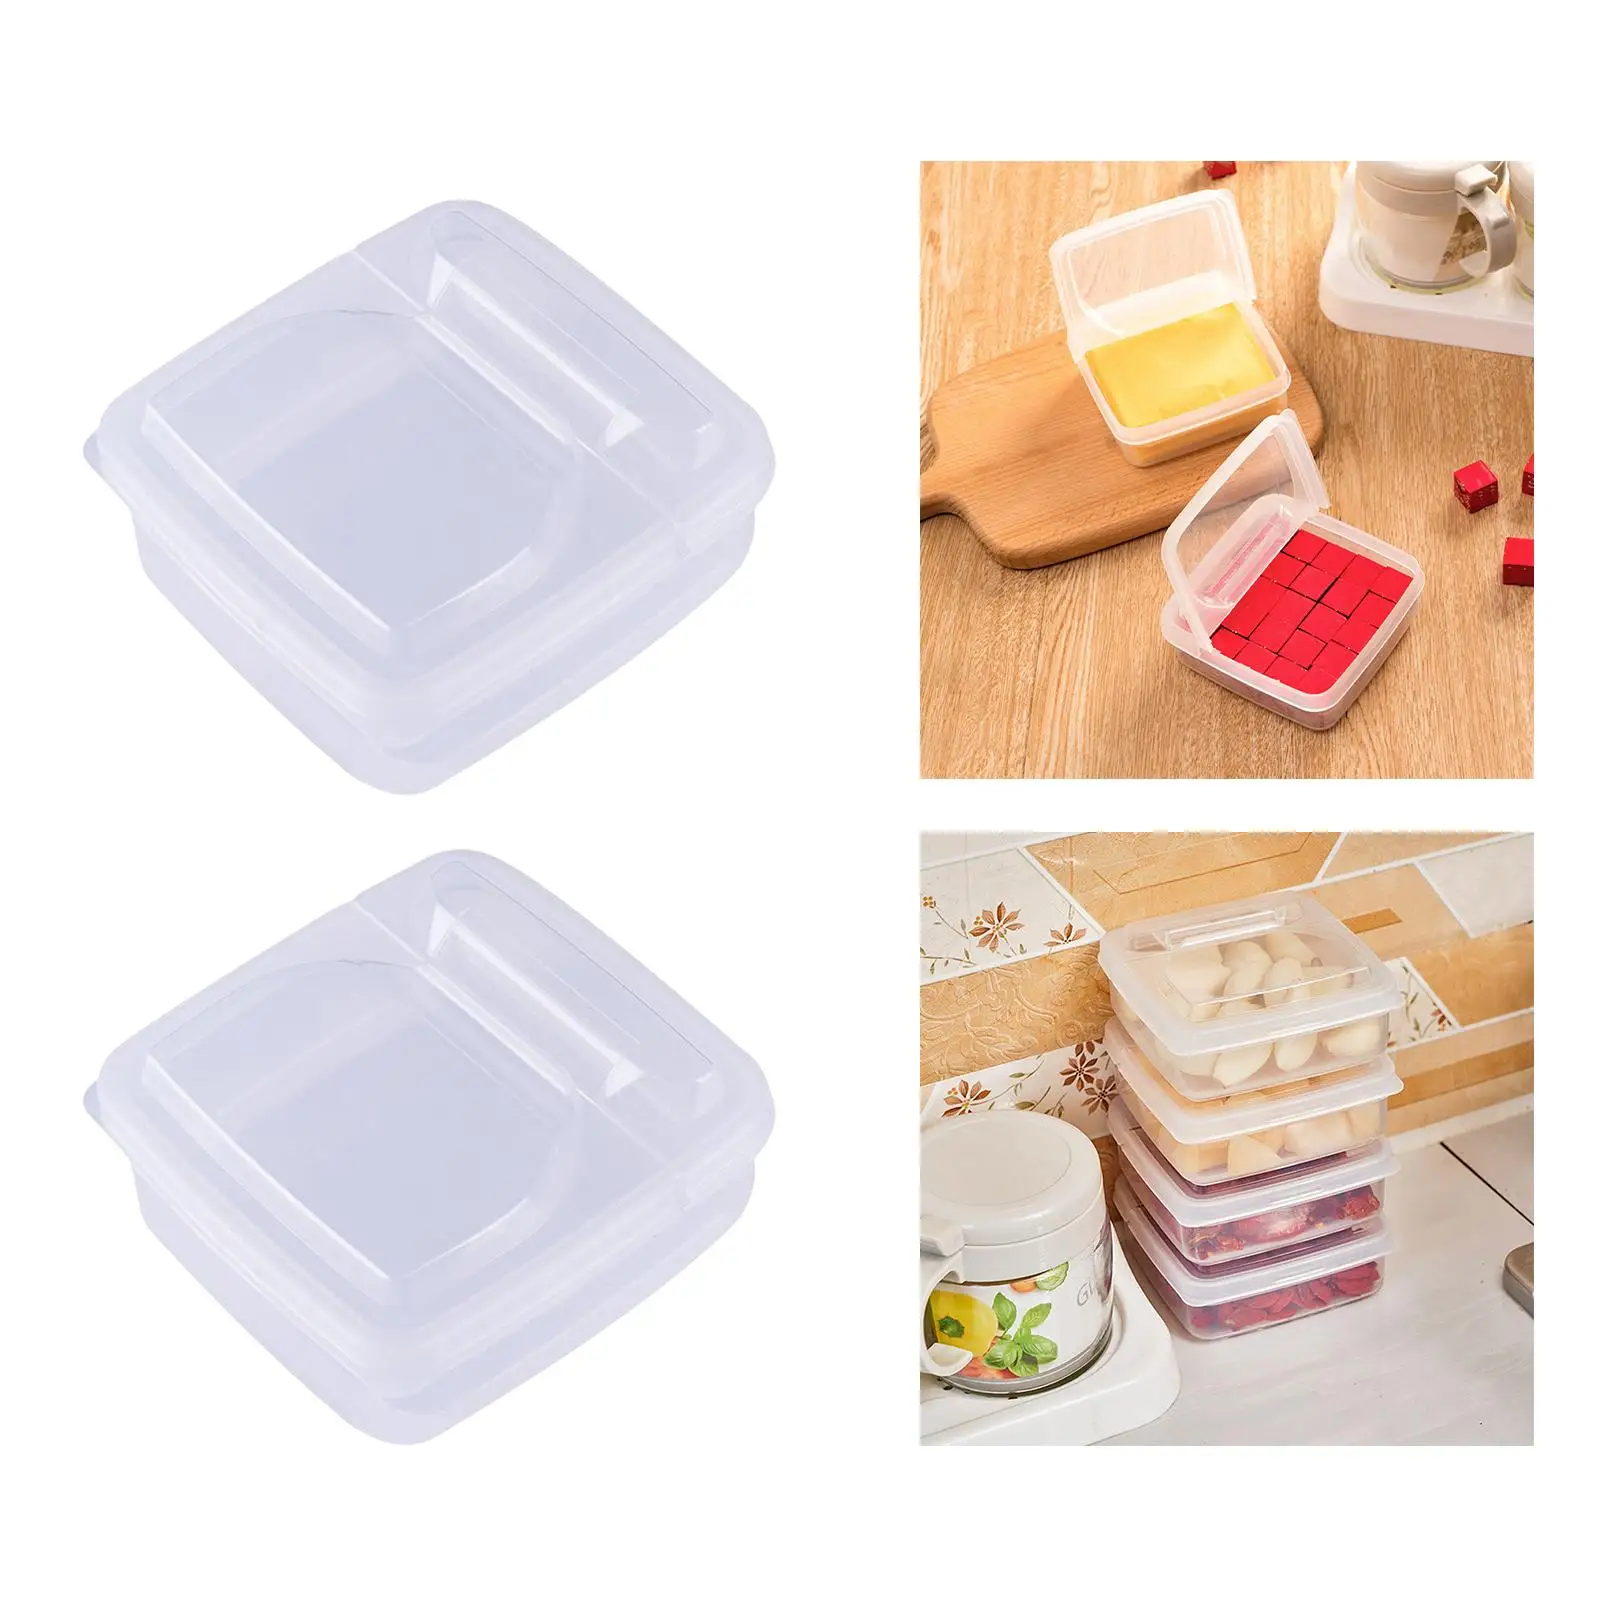 2Pcs Compact Refrigerator Container with Flip Lid Freezer Drawers Bins Clear Cookie Holder